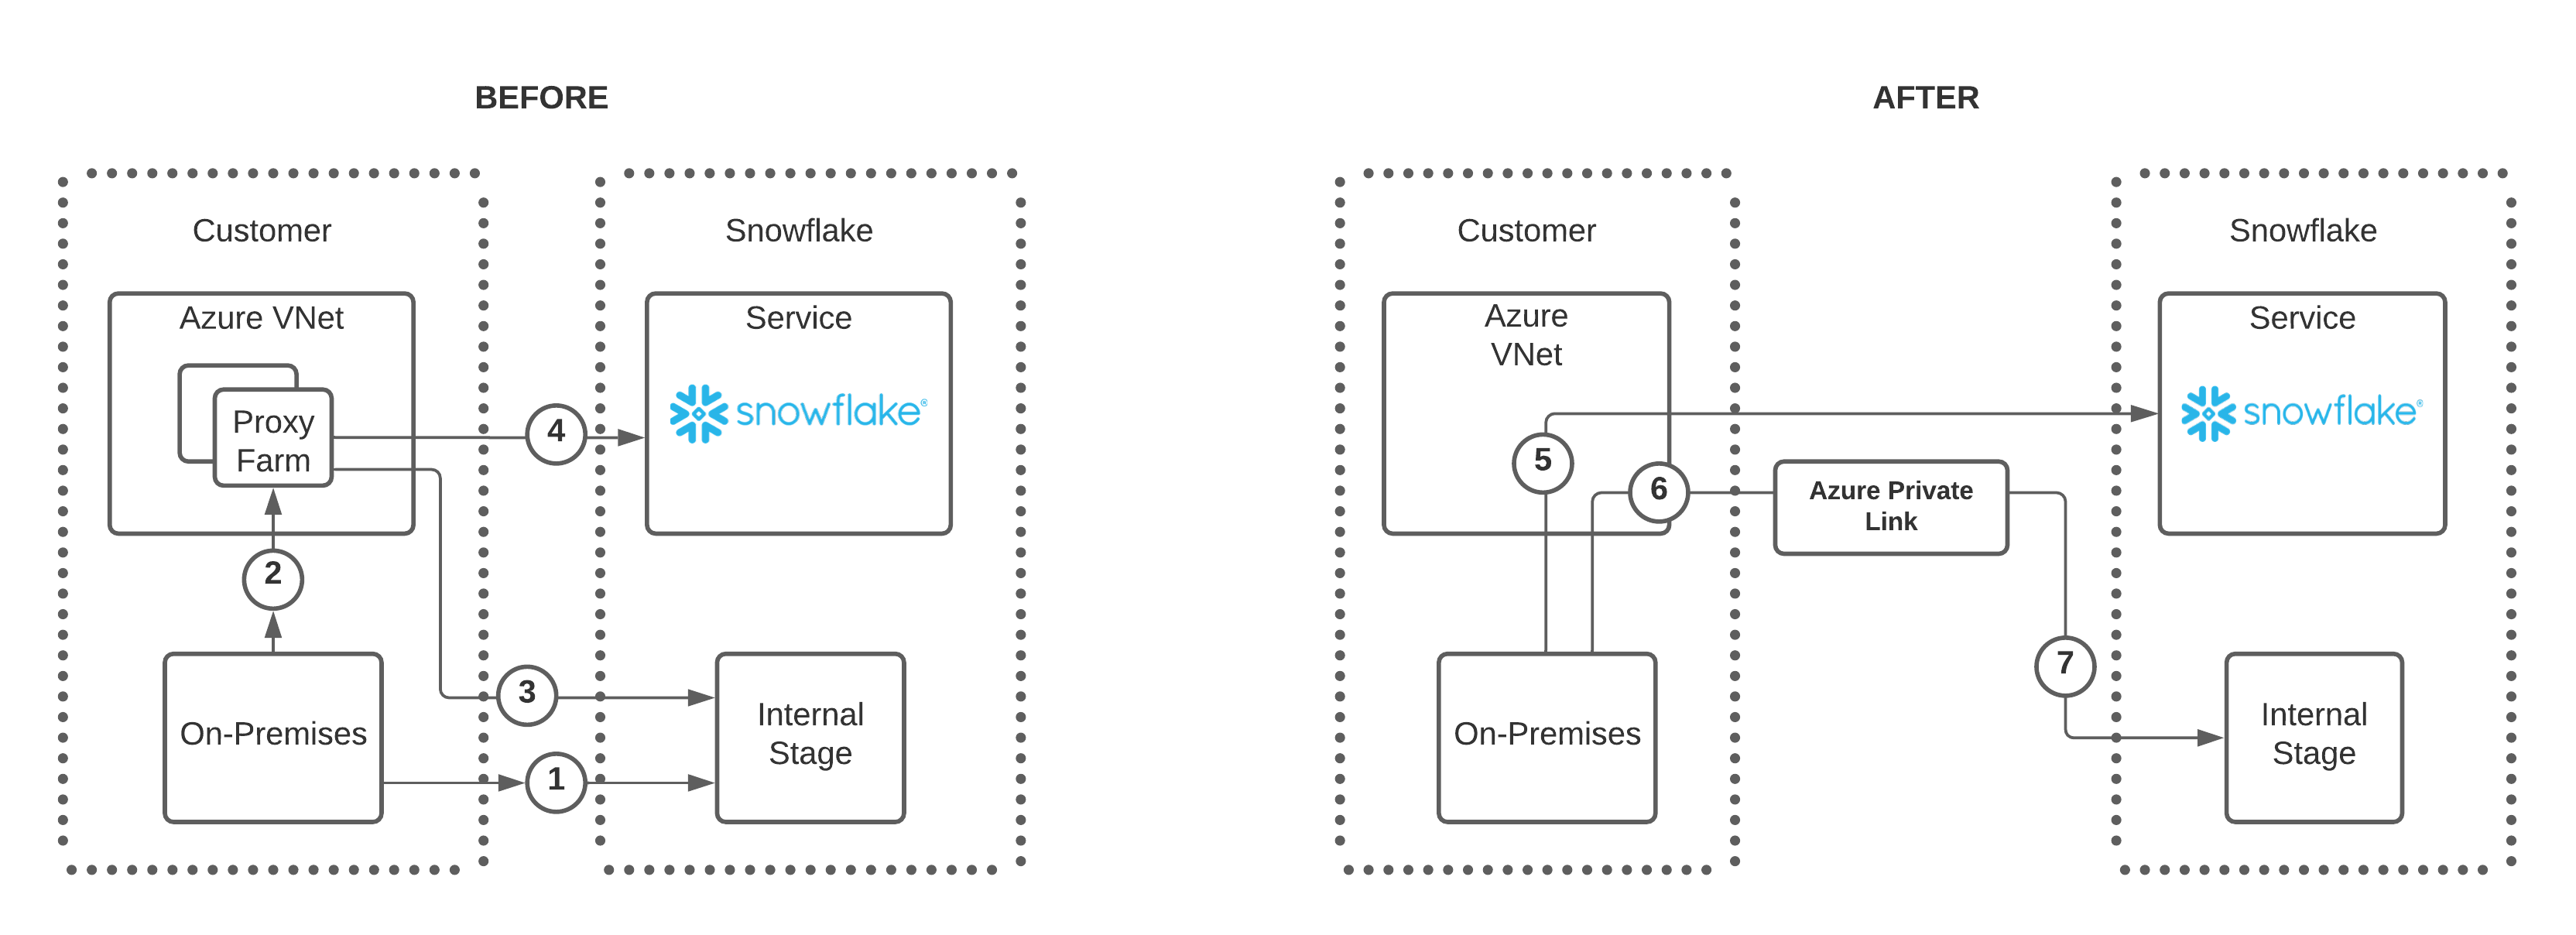 Connect to internal stage using Azure Private Link